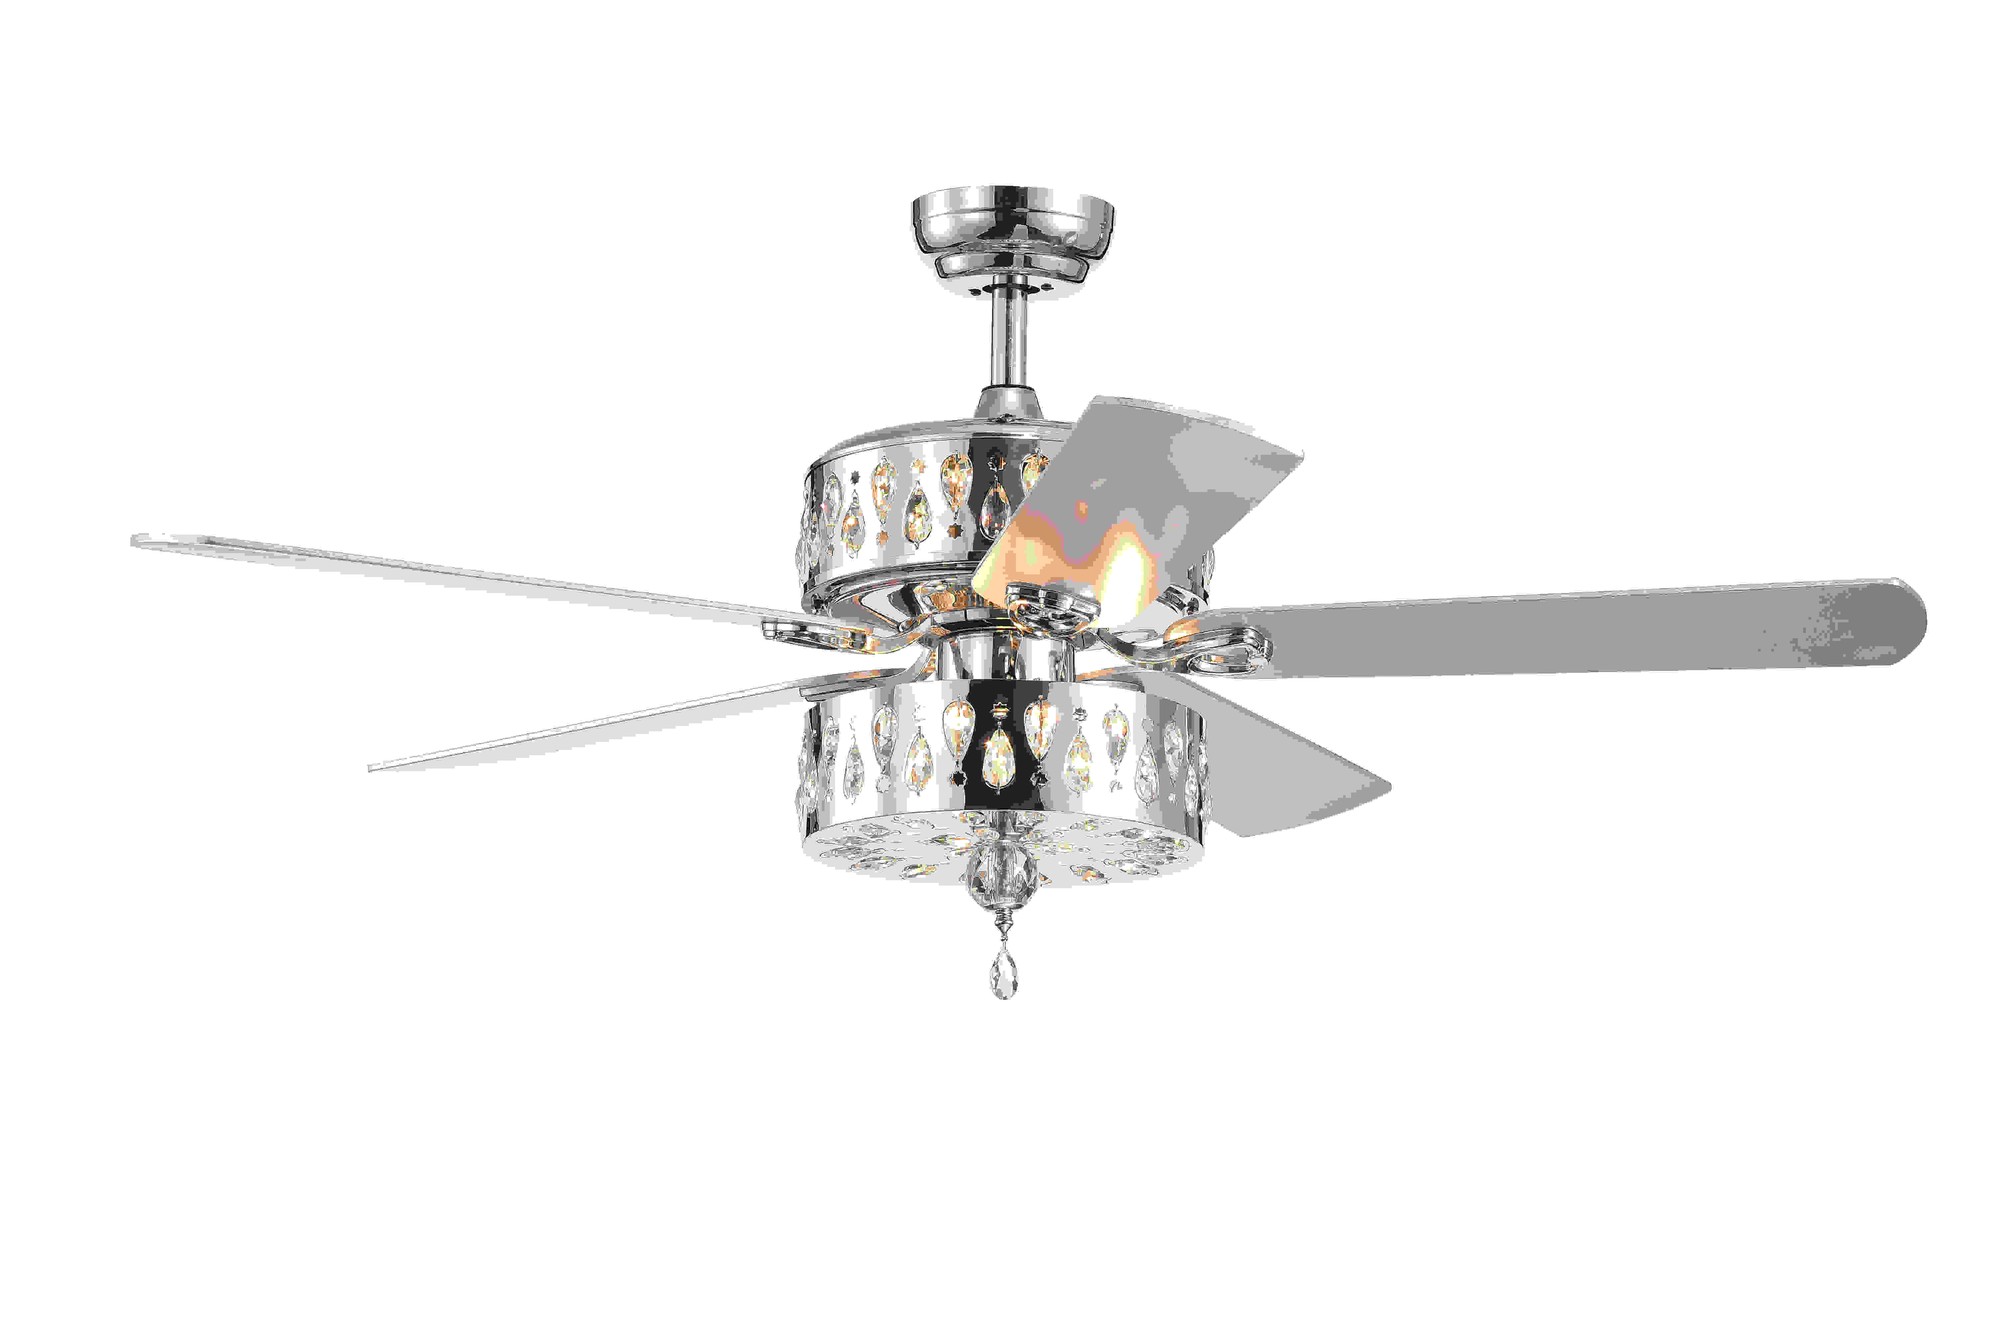 Ticuna Chrome and Crystal 52-inch Double Lamp Lighted Ceiling Fan (Remote Controlled & 2 Color Option Blades)